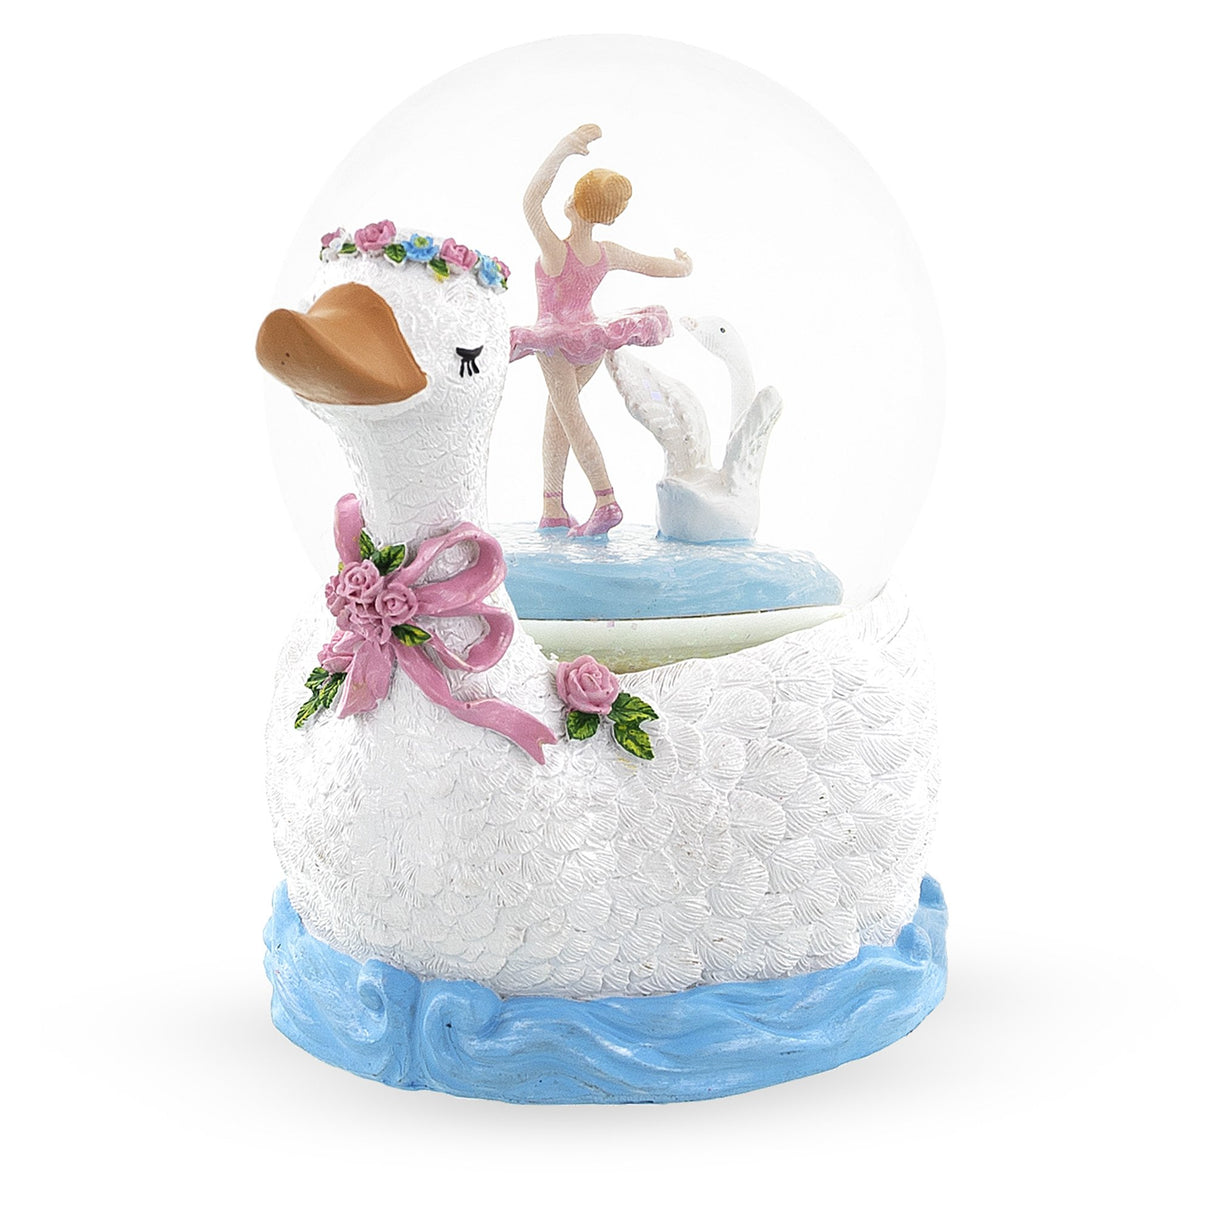 Graceful Swan Lake Ballet: Musical Water Snow Globe ,dimensions in inches: 5.8 x 4.5 x 5.79